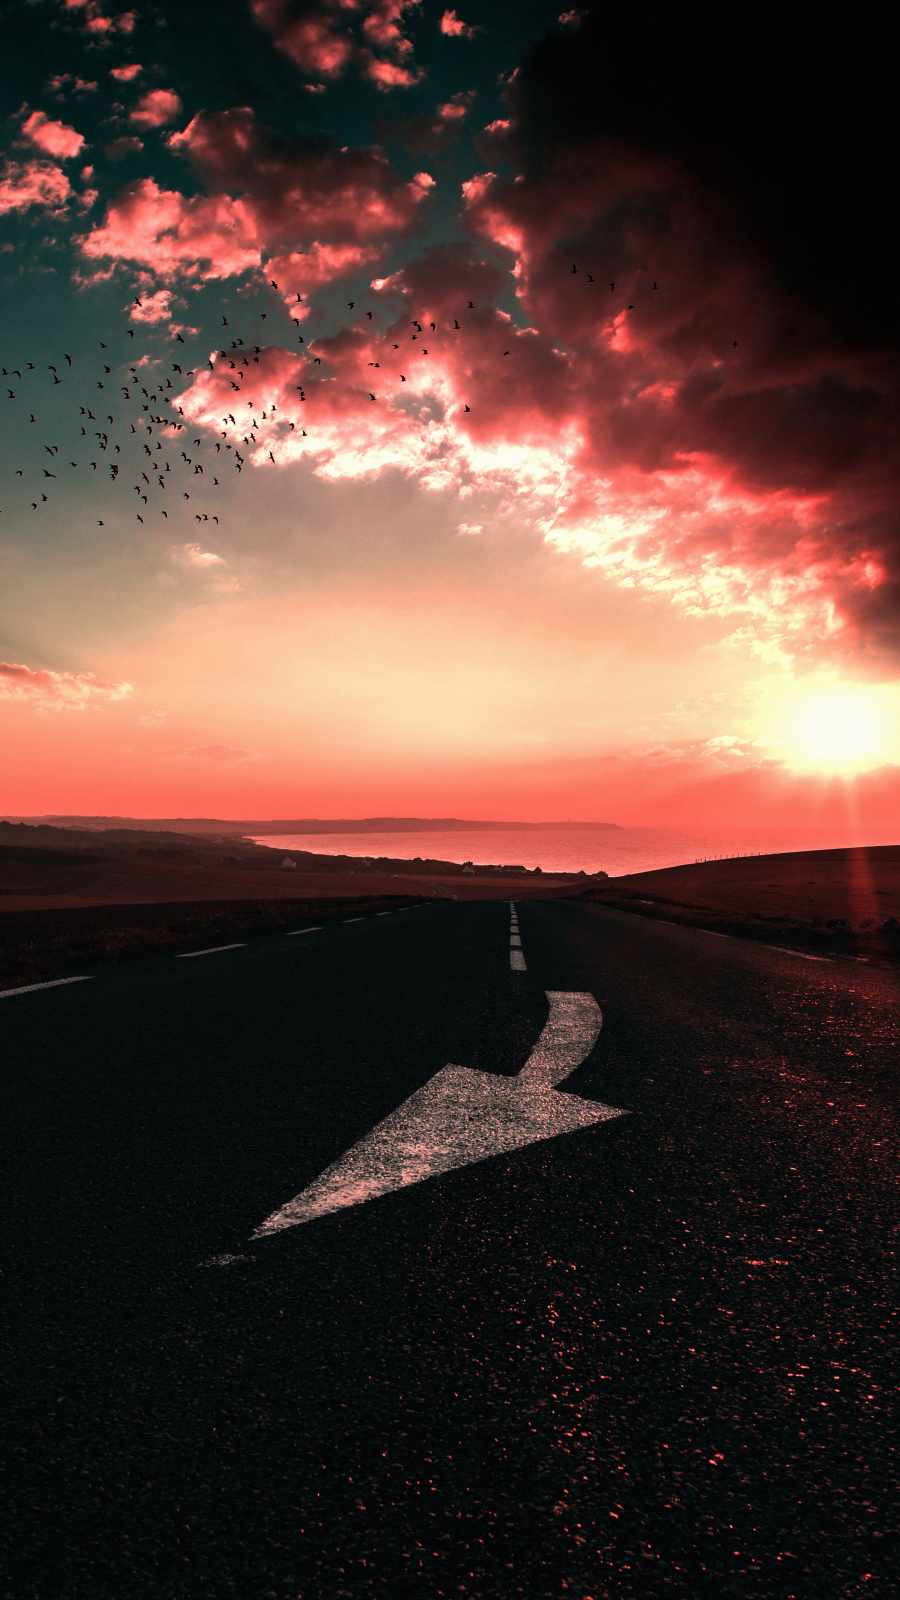 Sunset Cloudy Road iPhone Wallpaper